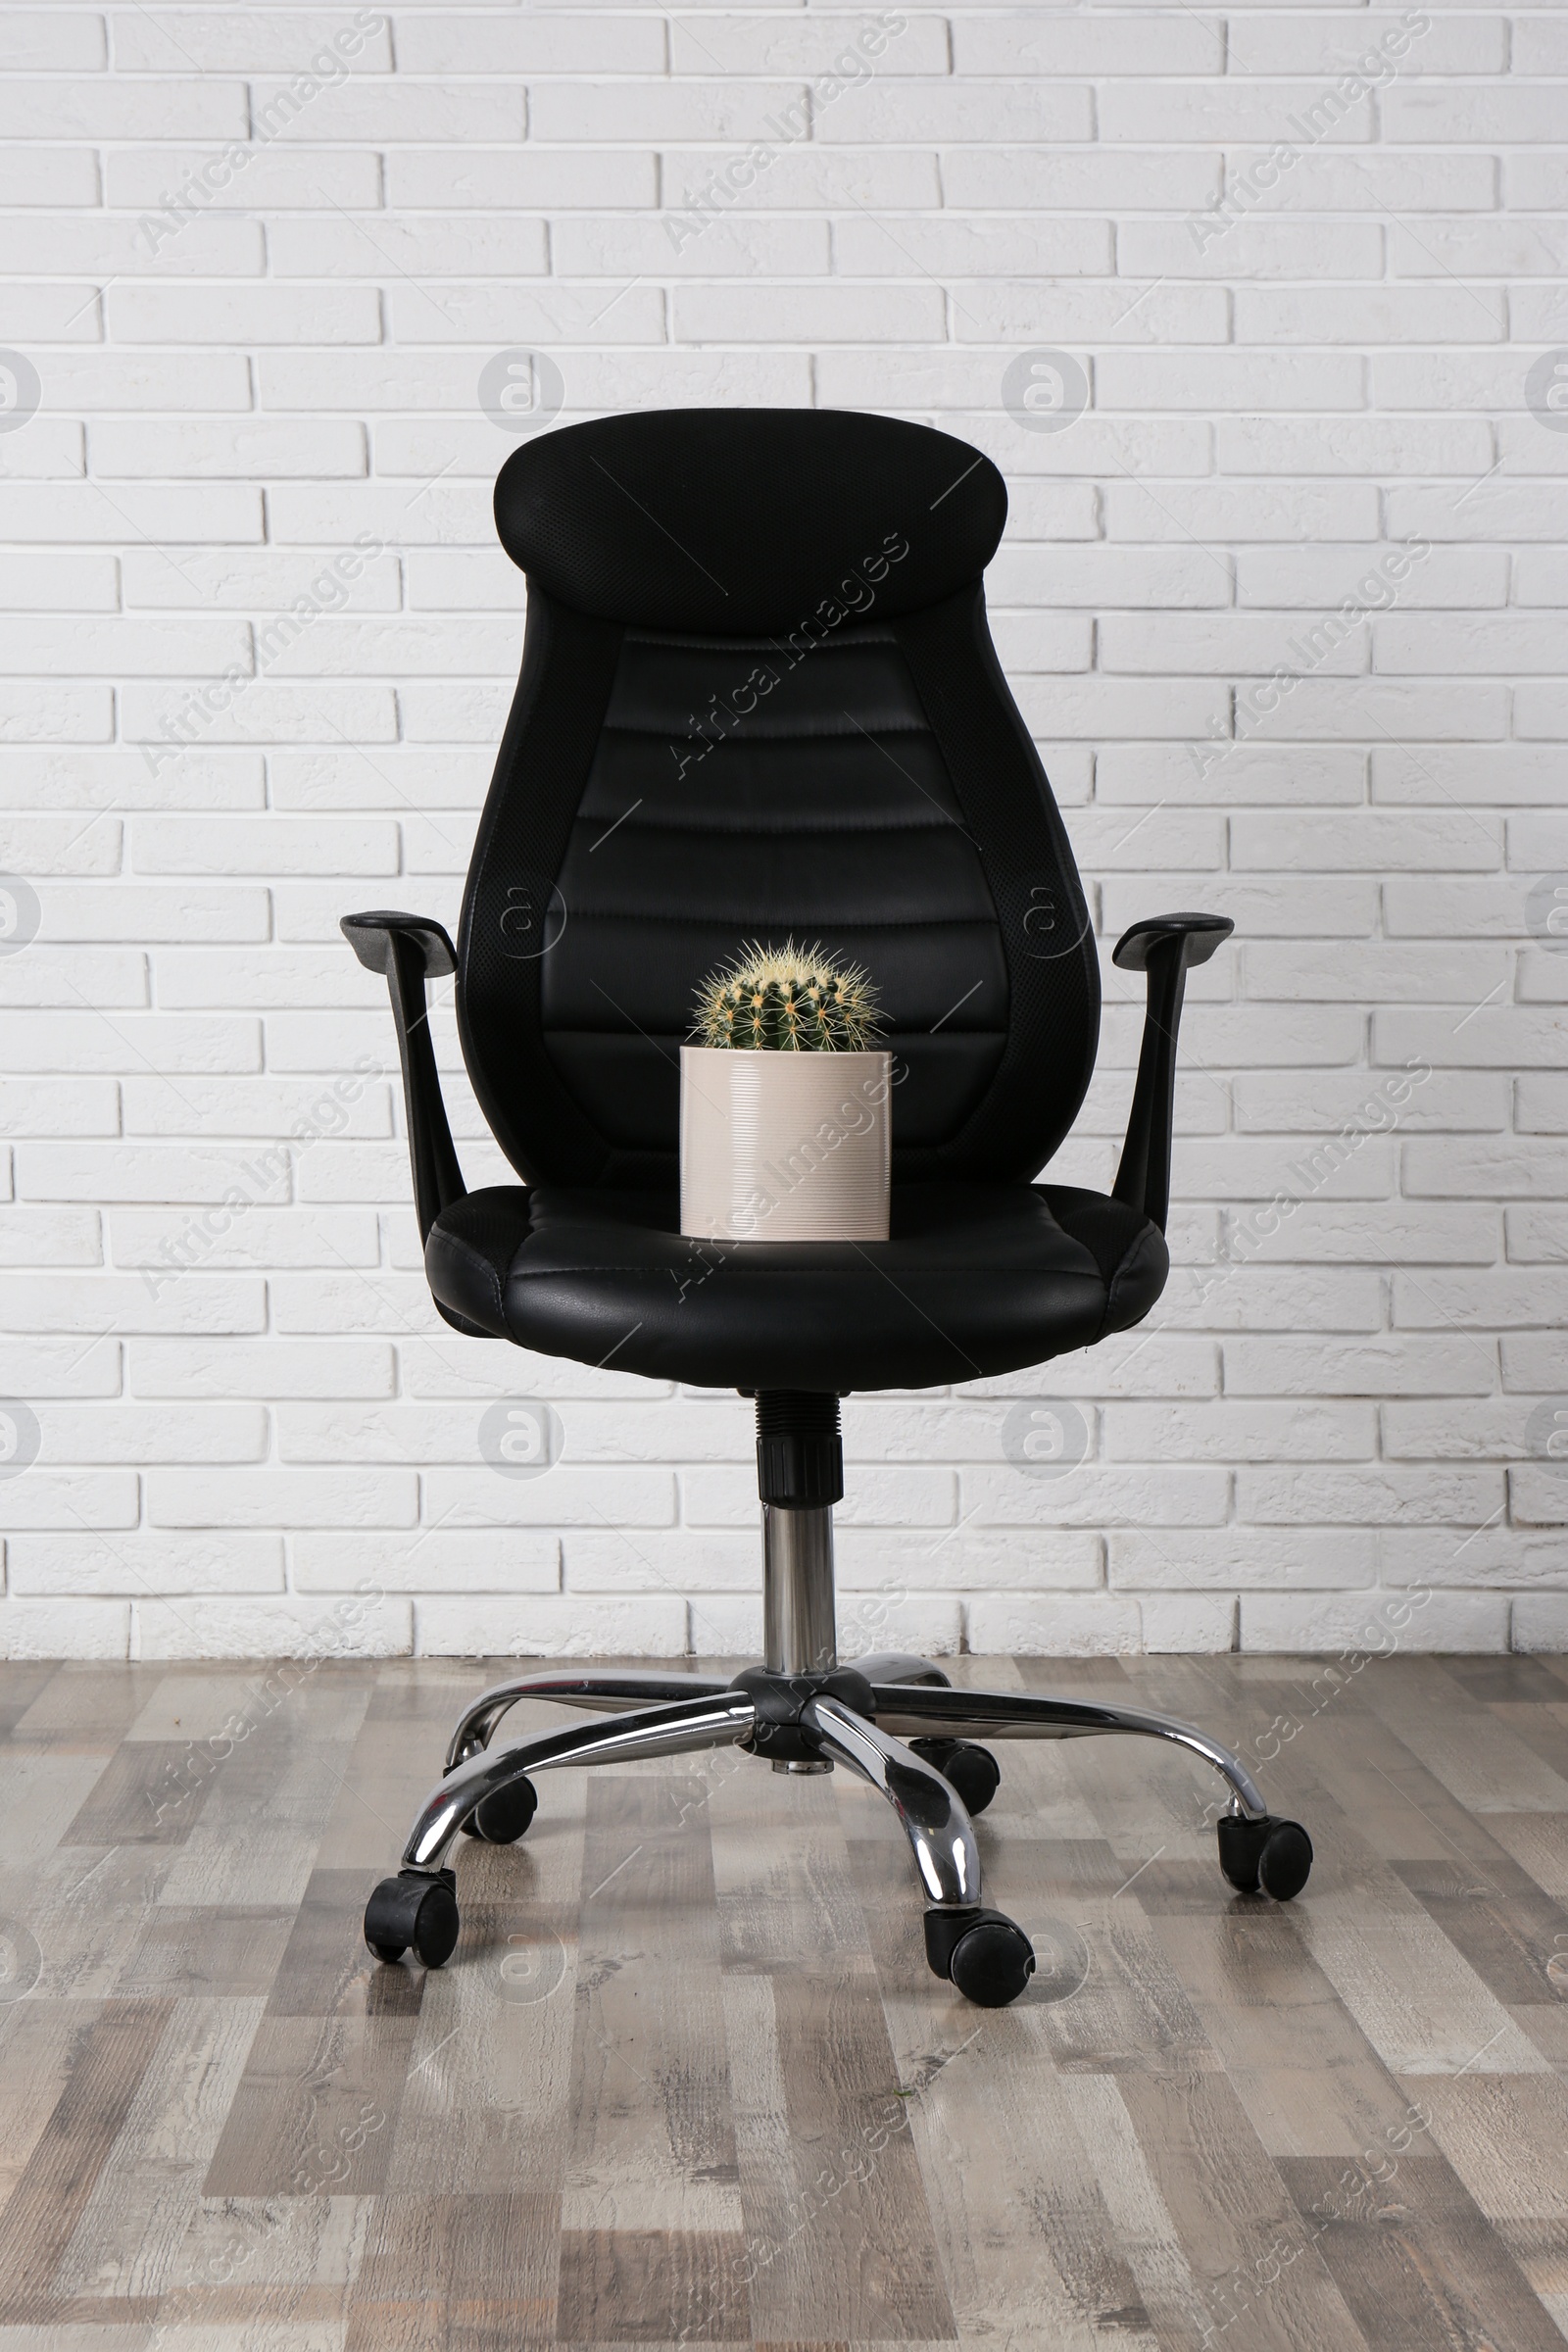 Photo of Office chair with cactus near white brick wall. Hemorrhoids concept